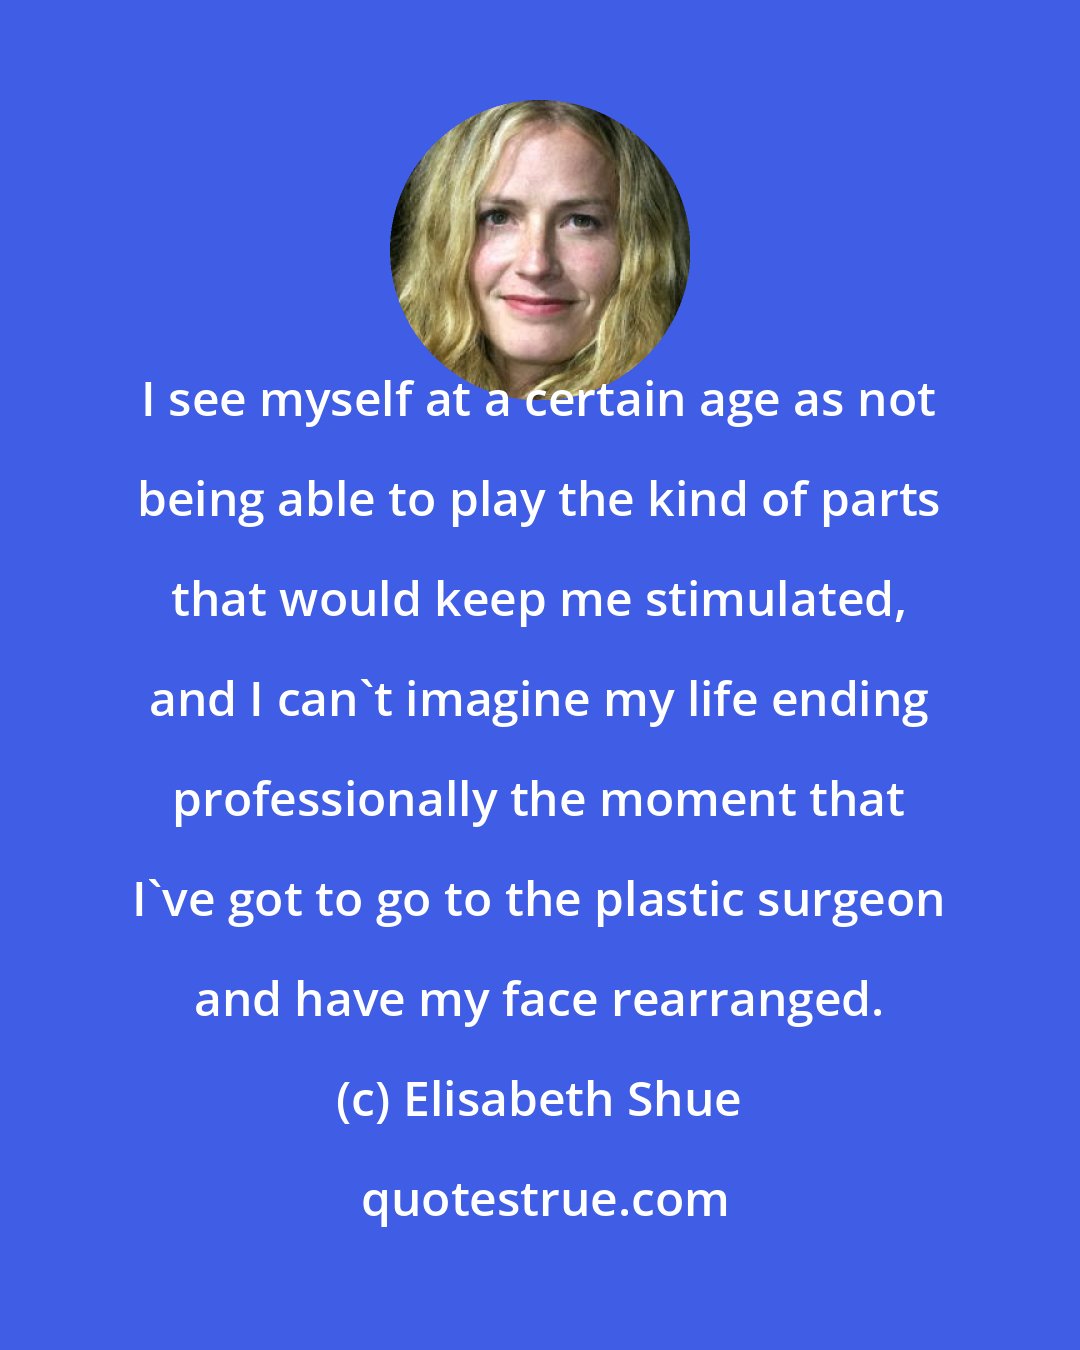 Elisabeth Shue: I see myself at a certain age as not being able to play the kind of parts that would keep me stimulated, and I can't imagine my life ending professionally the moment that I've got to go to the plastic surgeon and have my face rearranged.